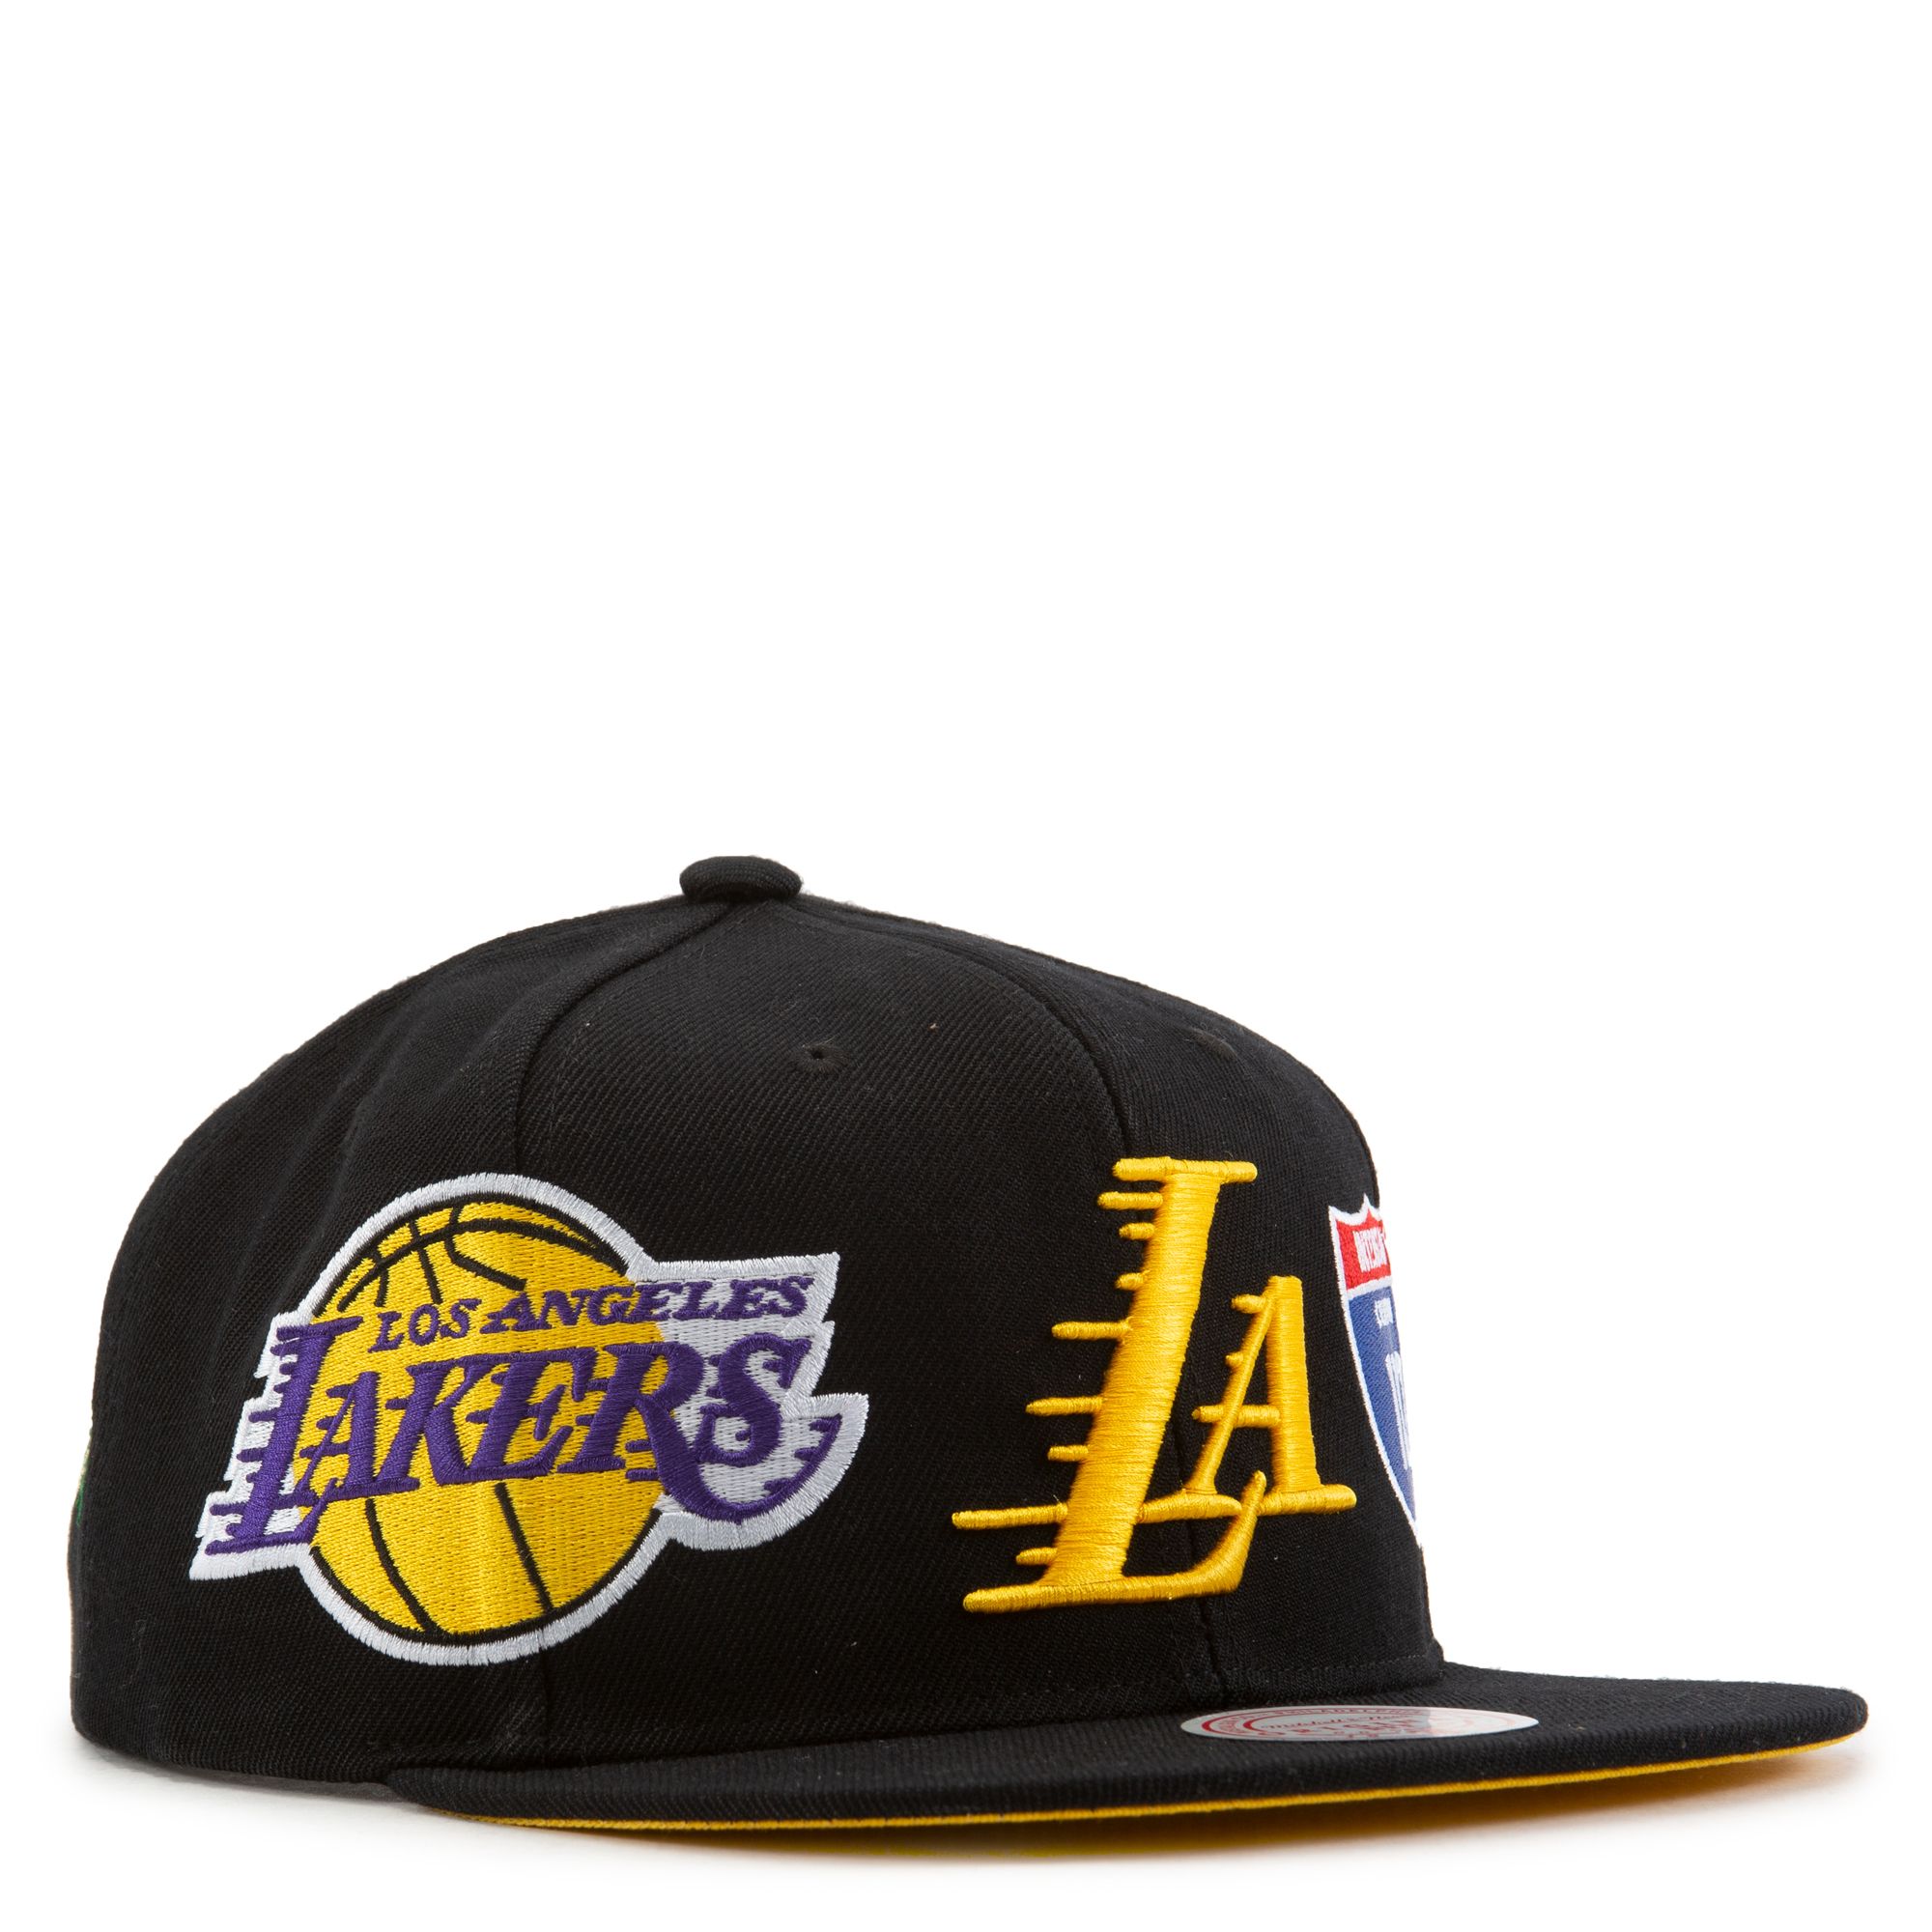 Los Angeles Lakers 2010 NBA Championship Hat for Sale in Los